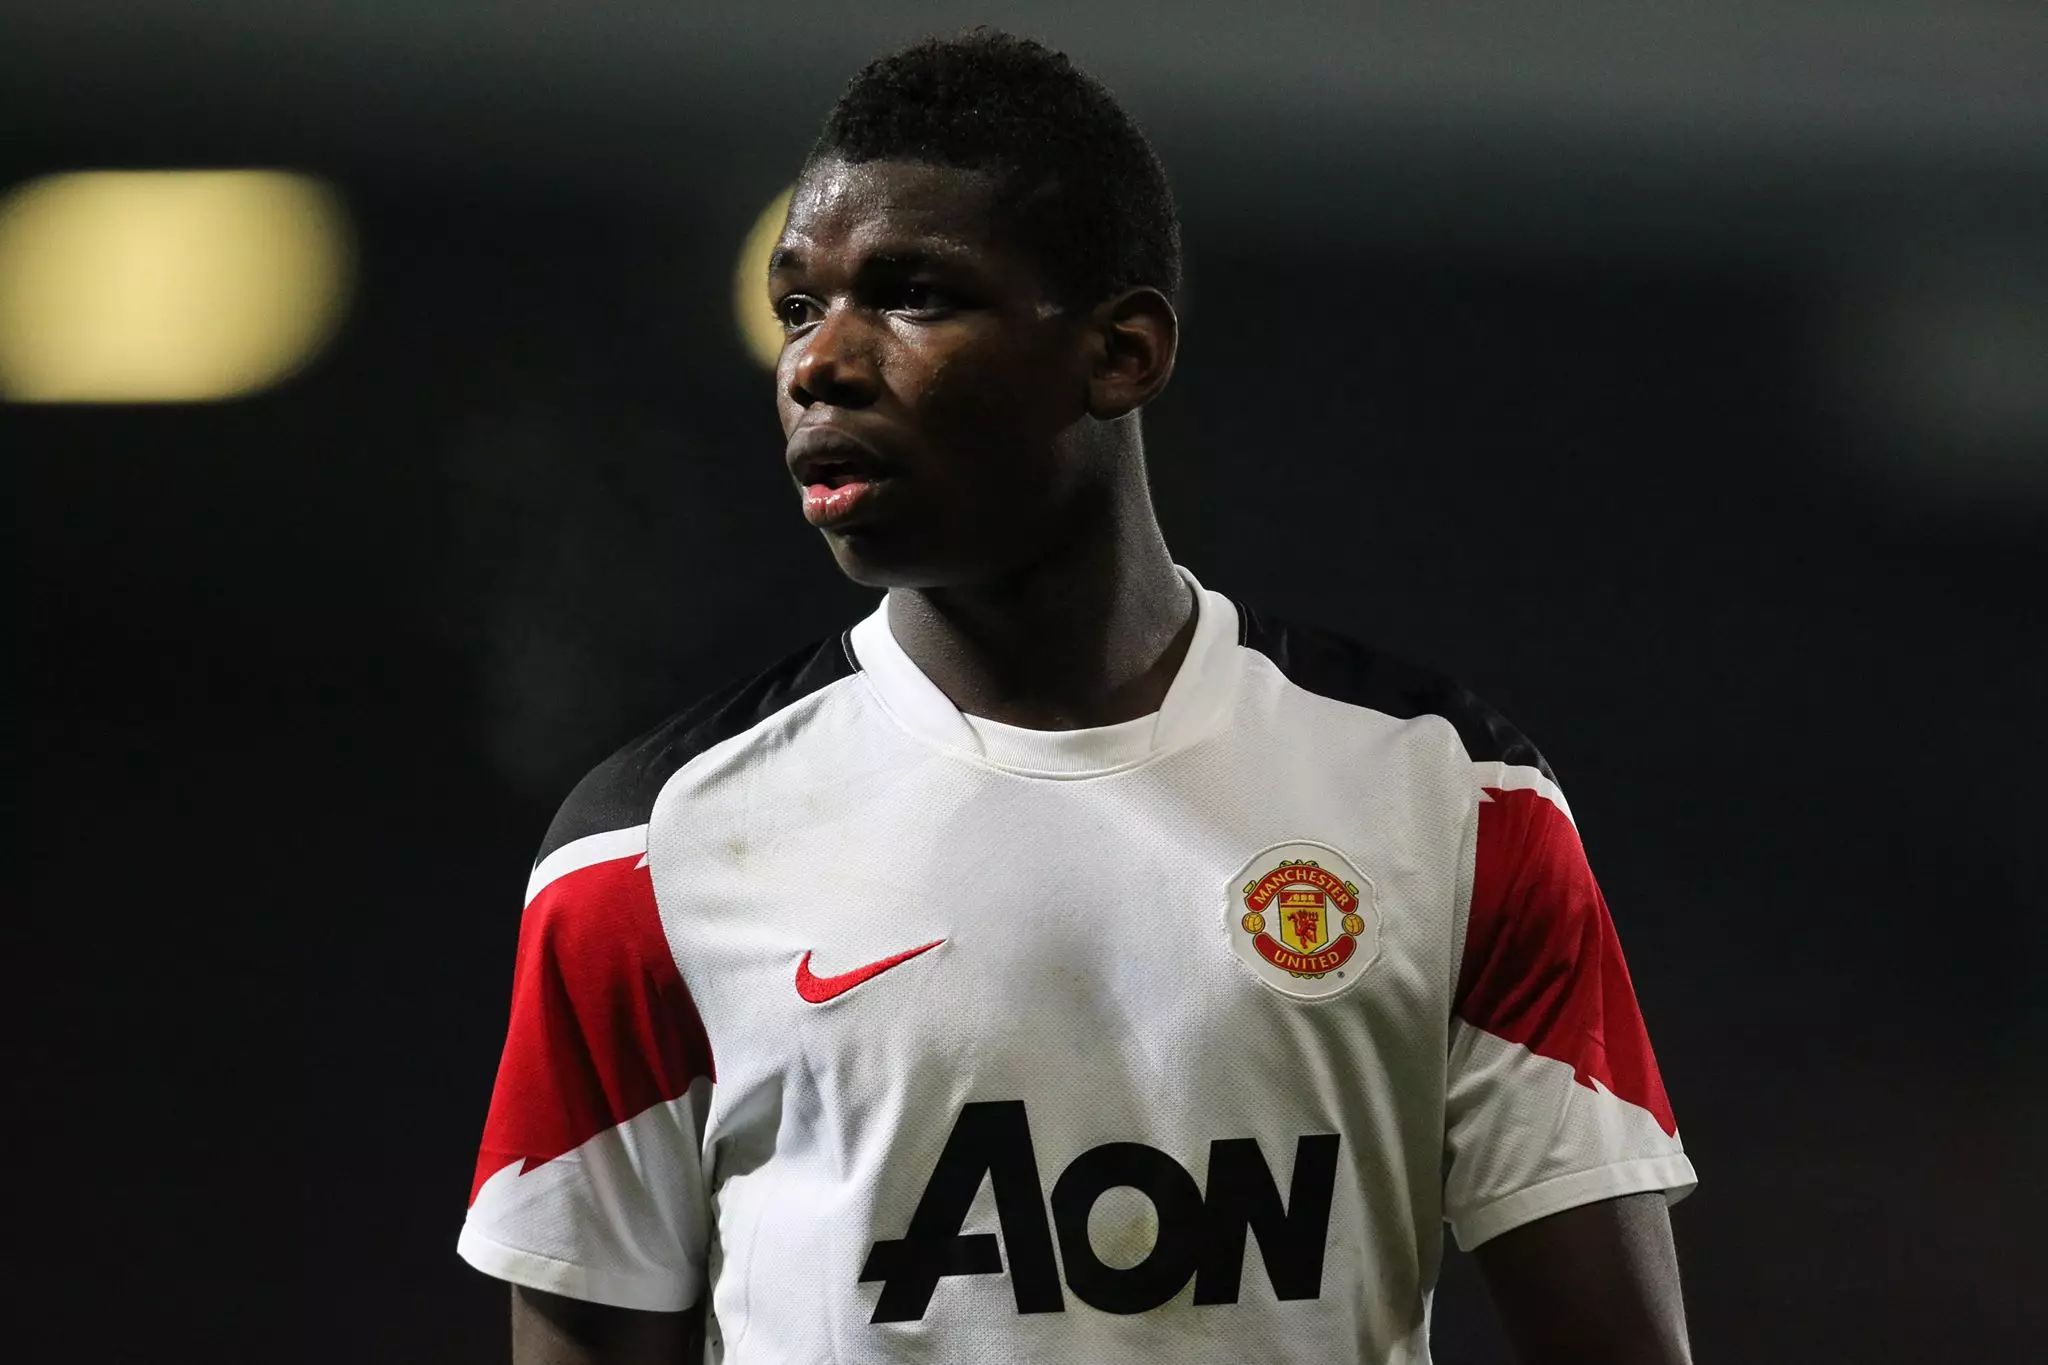 Pogba returned to United and signed his first deal there. Image: PA Images